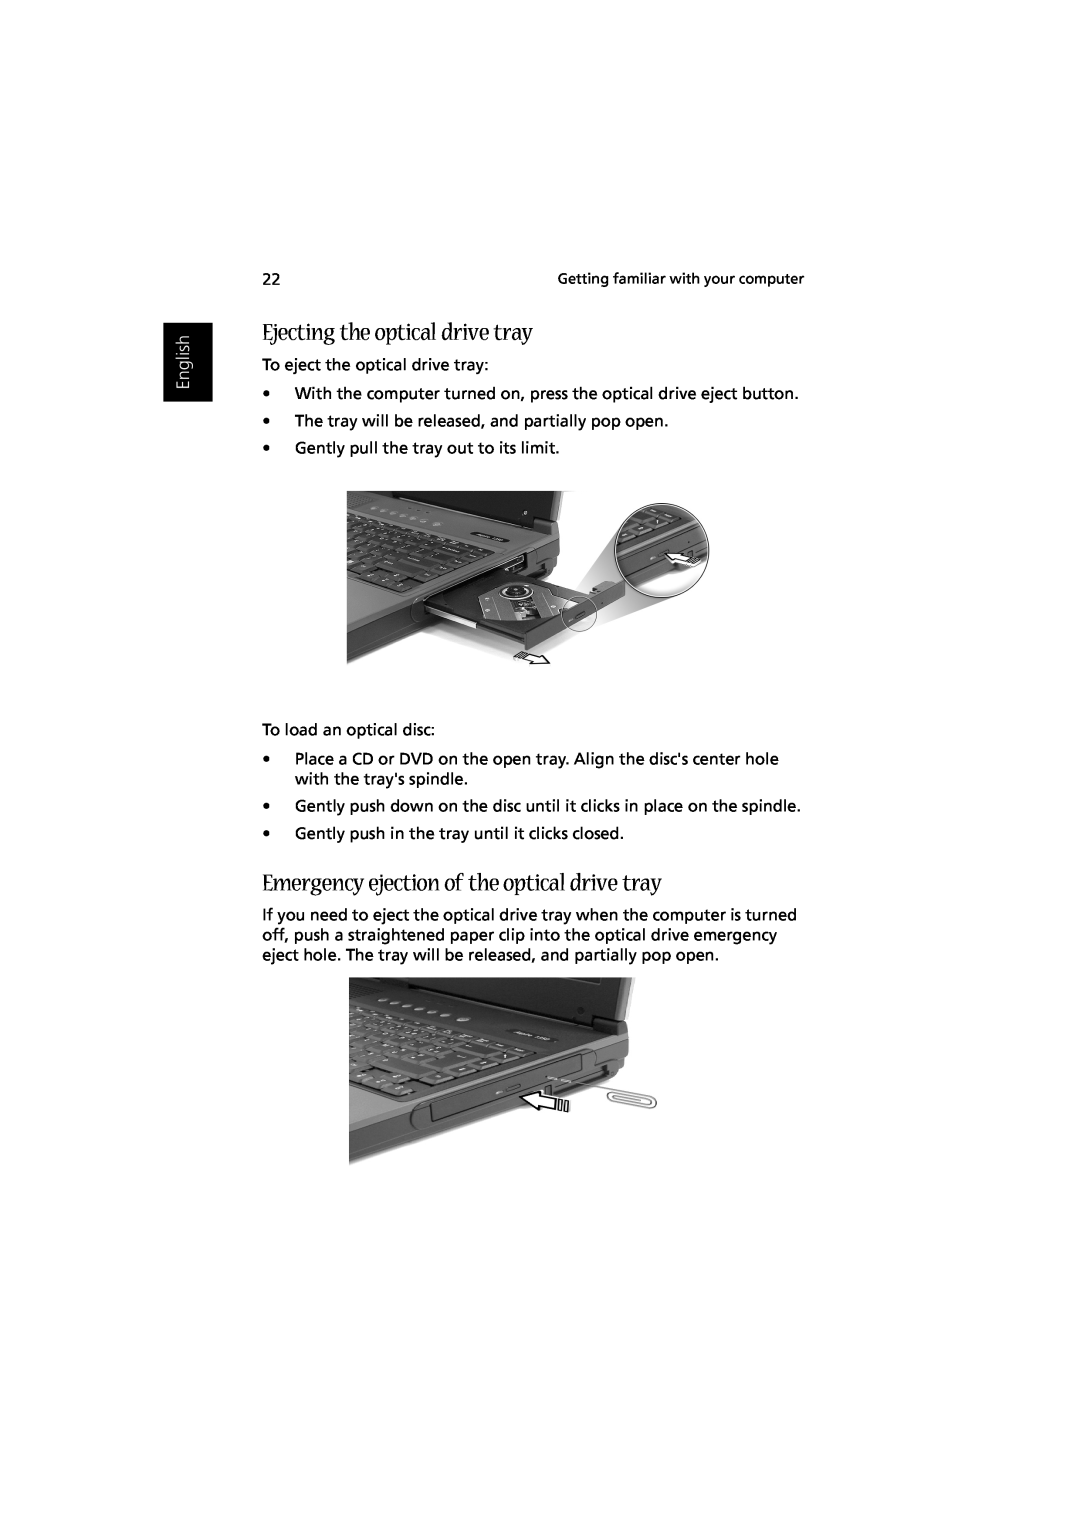 Acer Aspire 1350 manual Ejecting the optical drive tray, Emergency ejection of the optical drive tray, English 